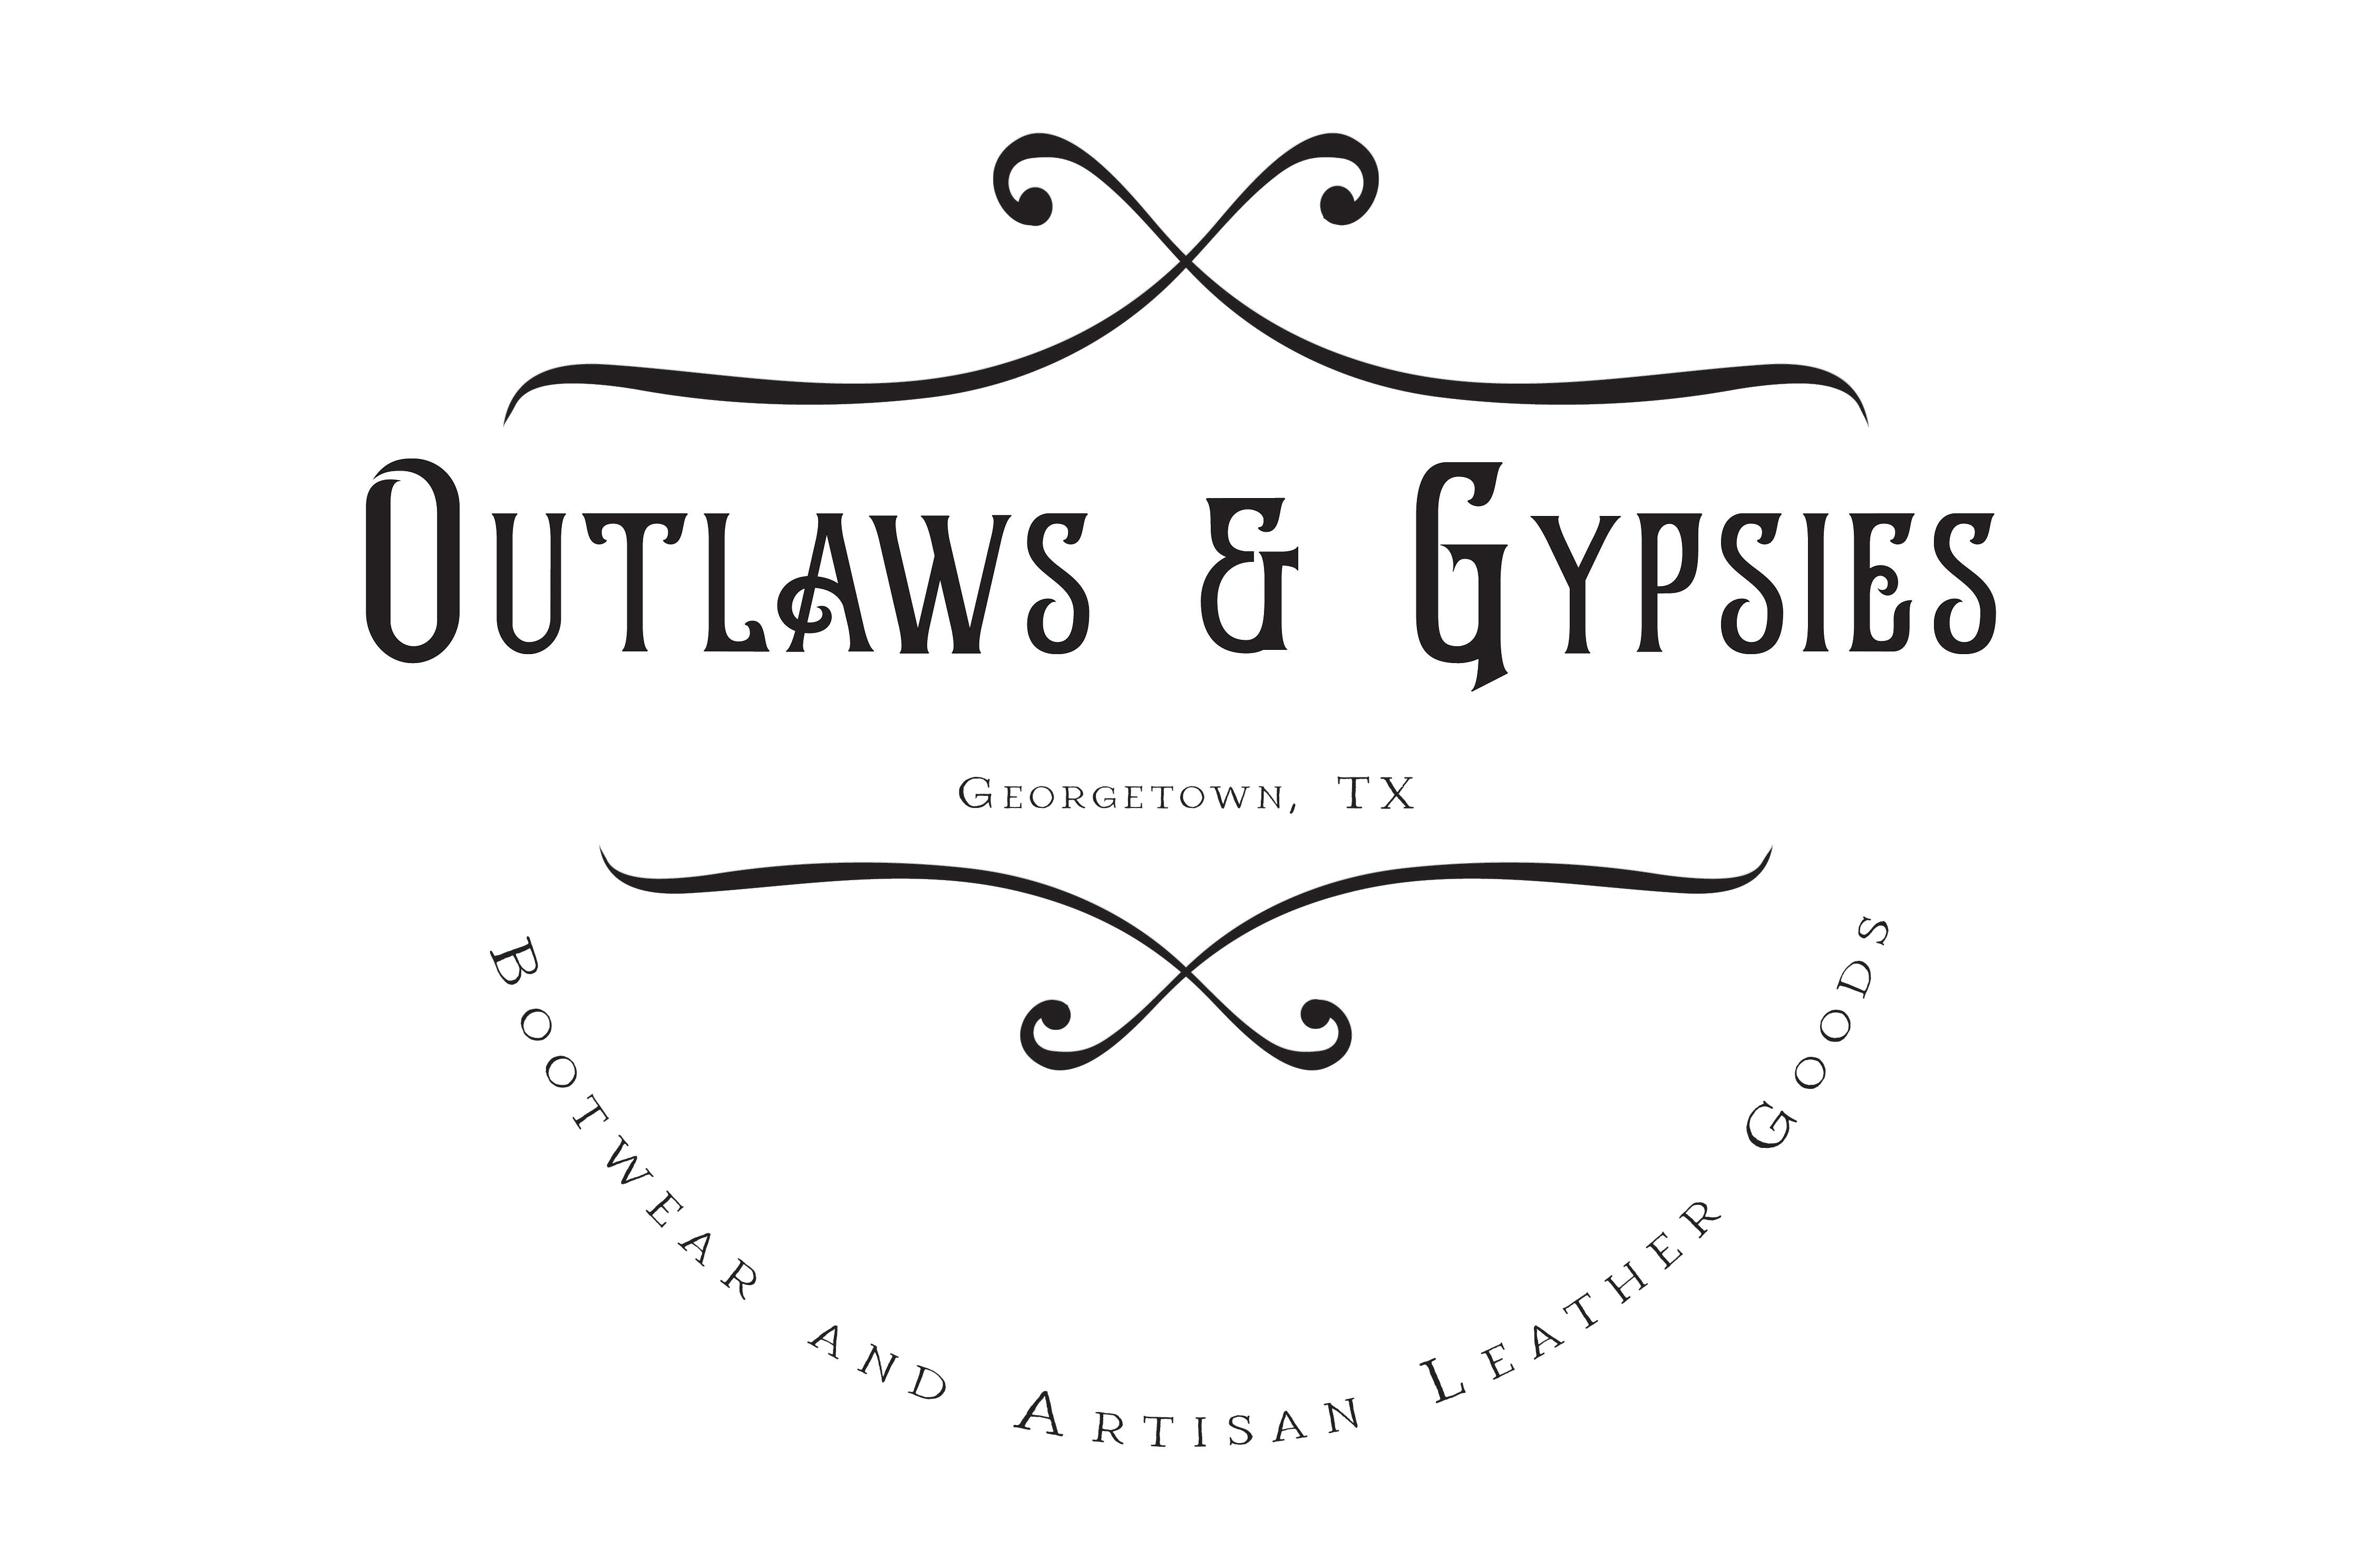 Outlaws and Gypsies